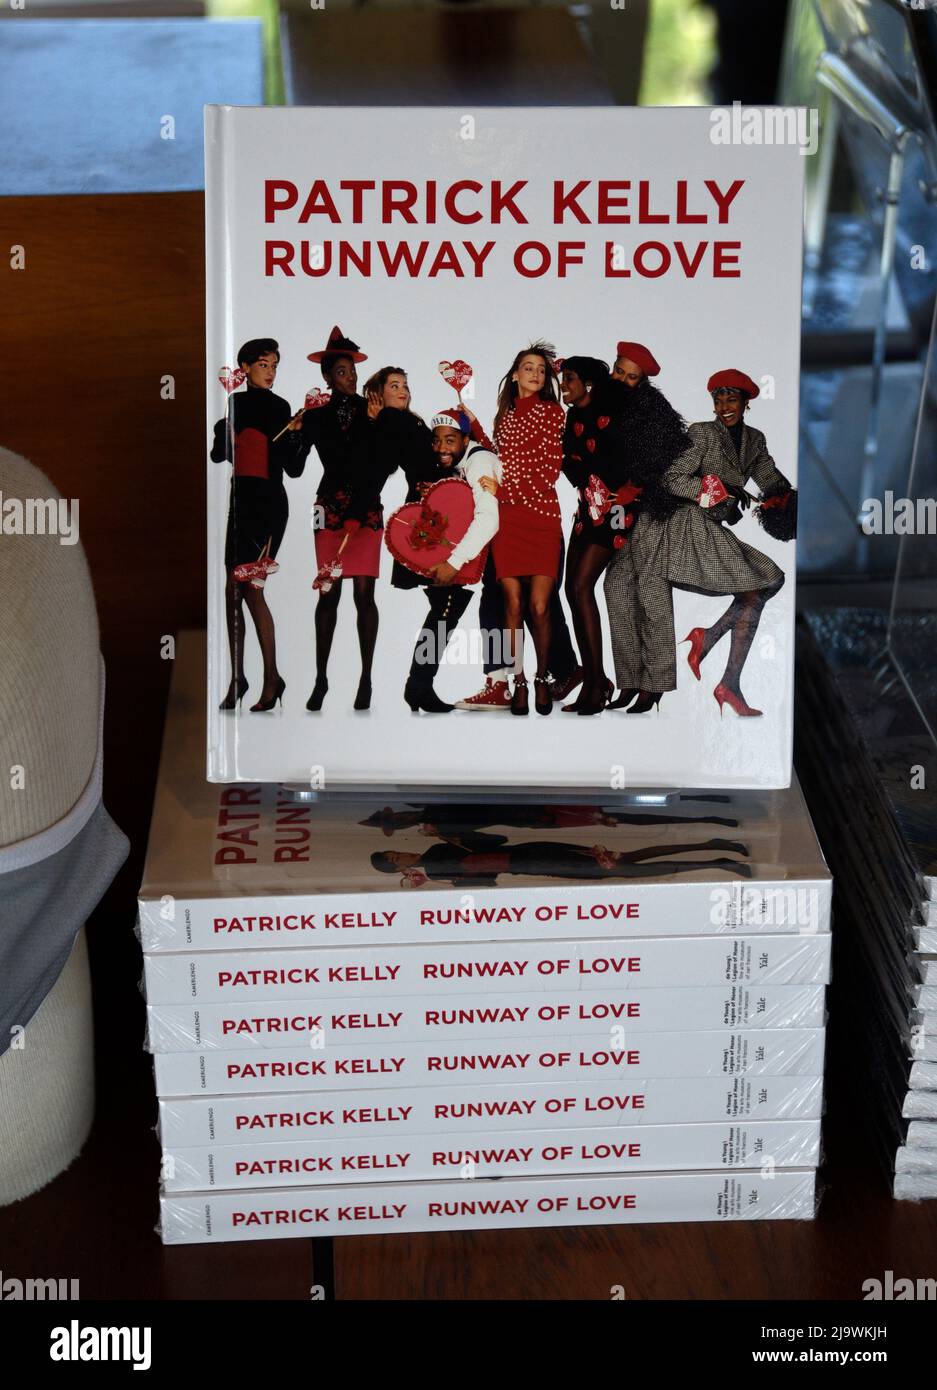 Copies of the book 'Patrick Kelly Runway of Love' for sale at the M.H. de Young Memorial Museum in San Francisco, California. Stock Photo